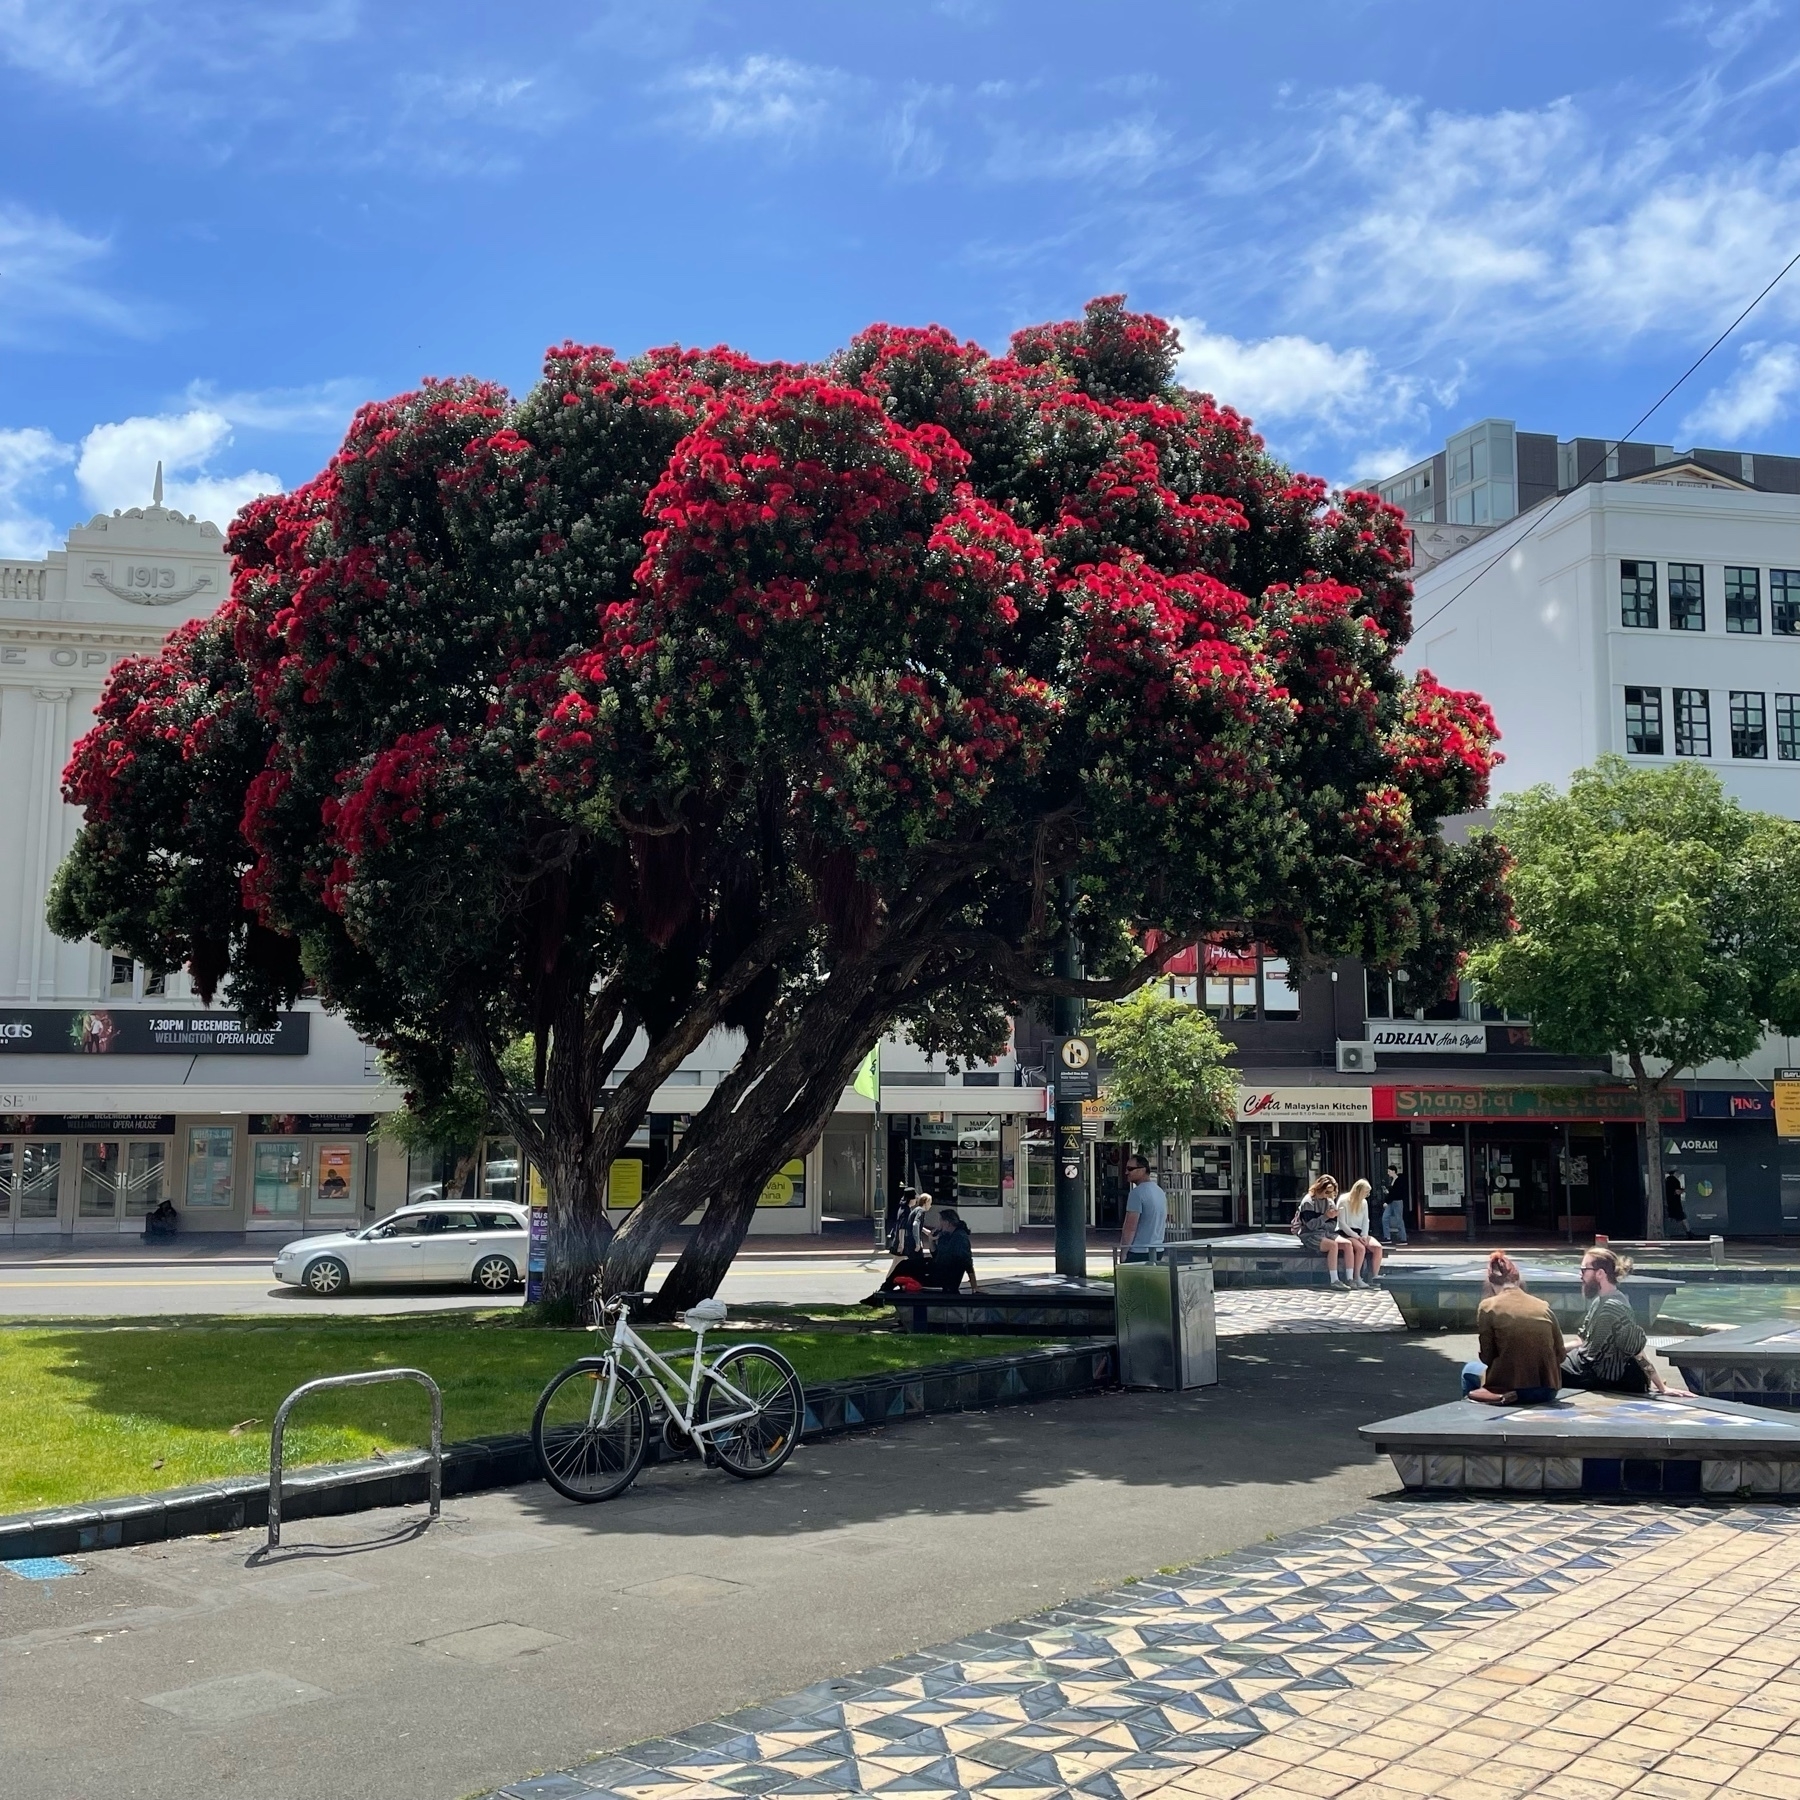 Pōhutukawa tree with dark green leaves and bright red flowers in a small park. Blue sky above. 